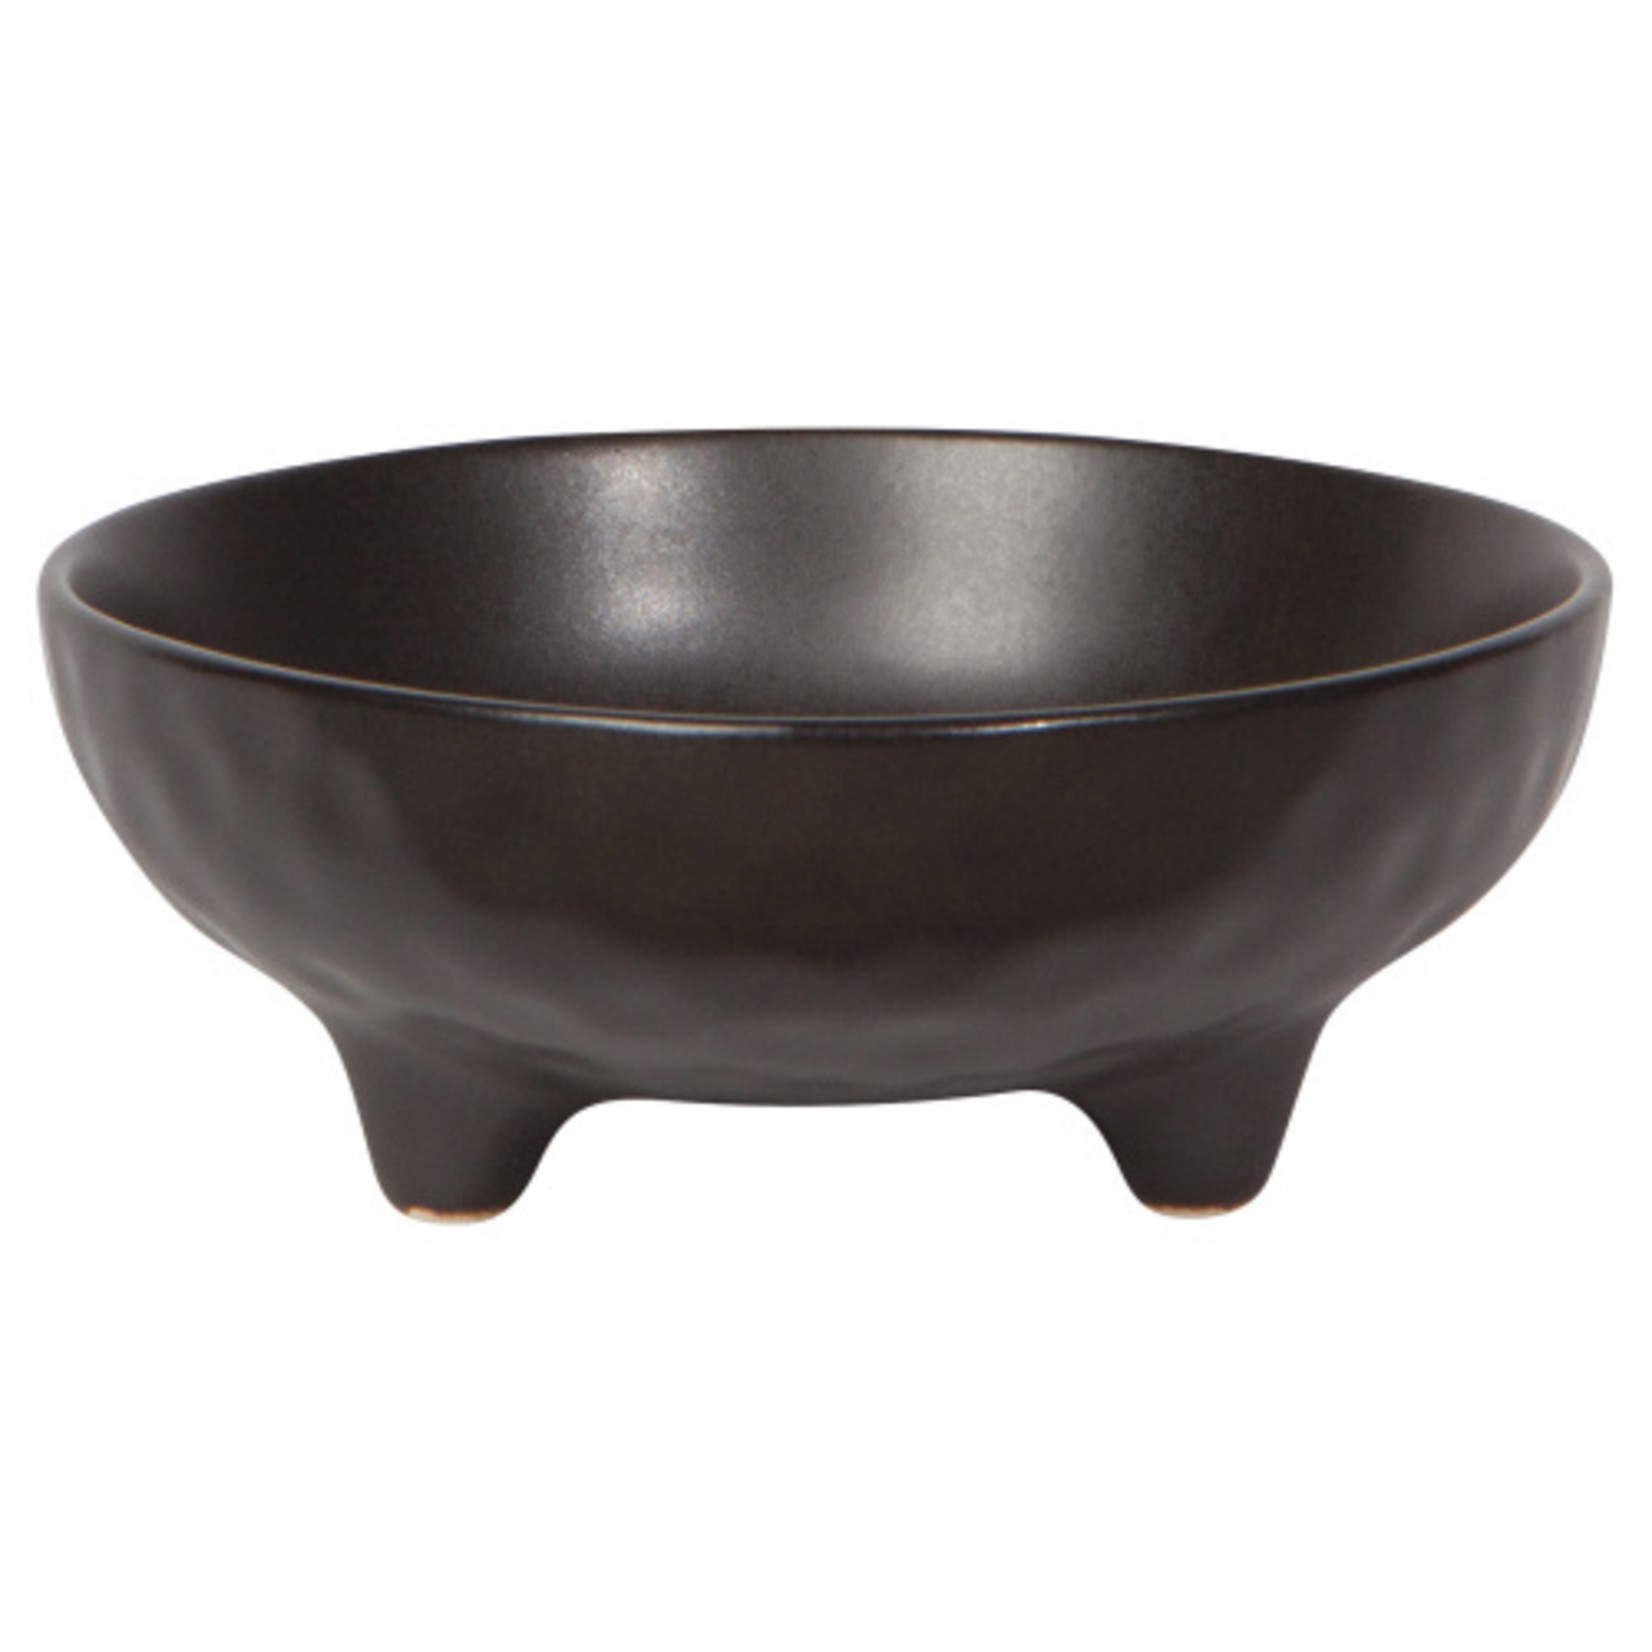 Danica Footed Bowl 4.5